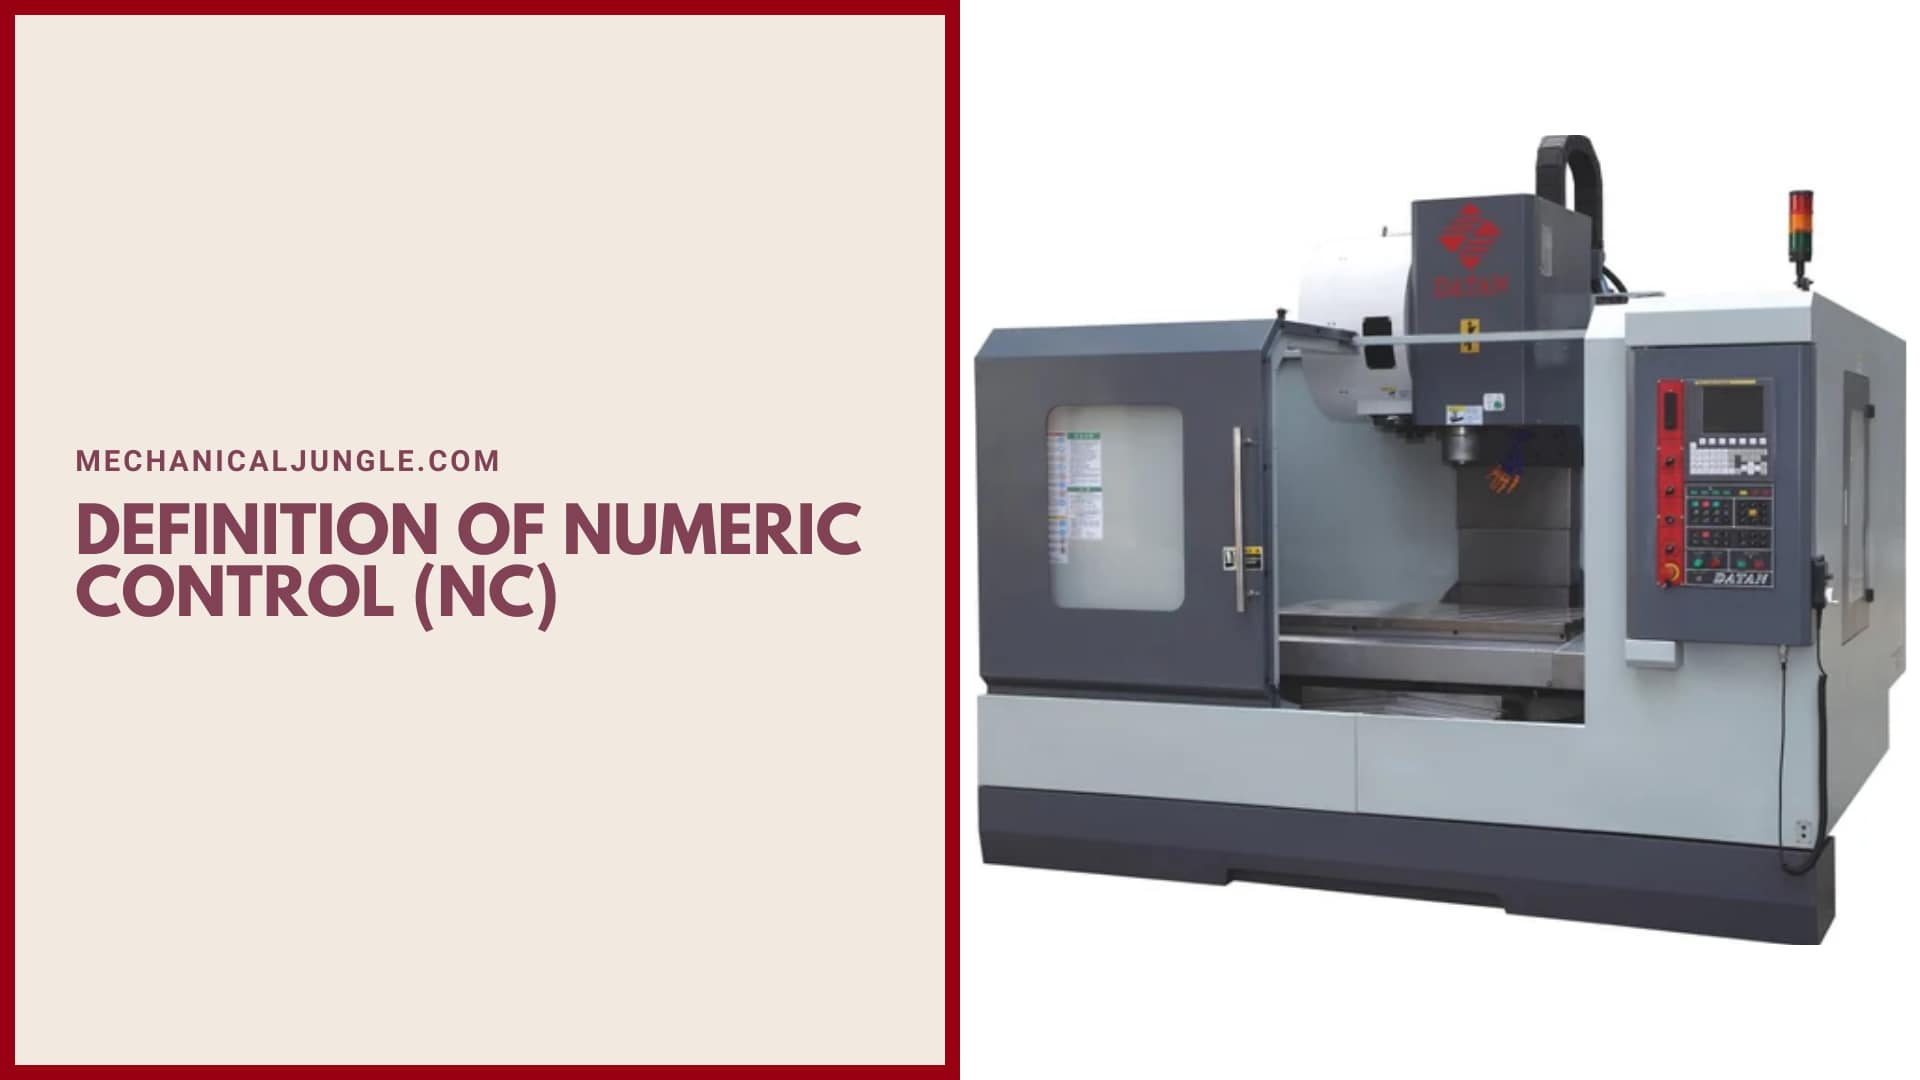 Definition of Numeric Control (NC)